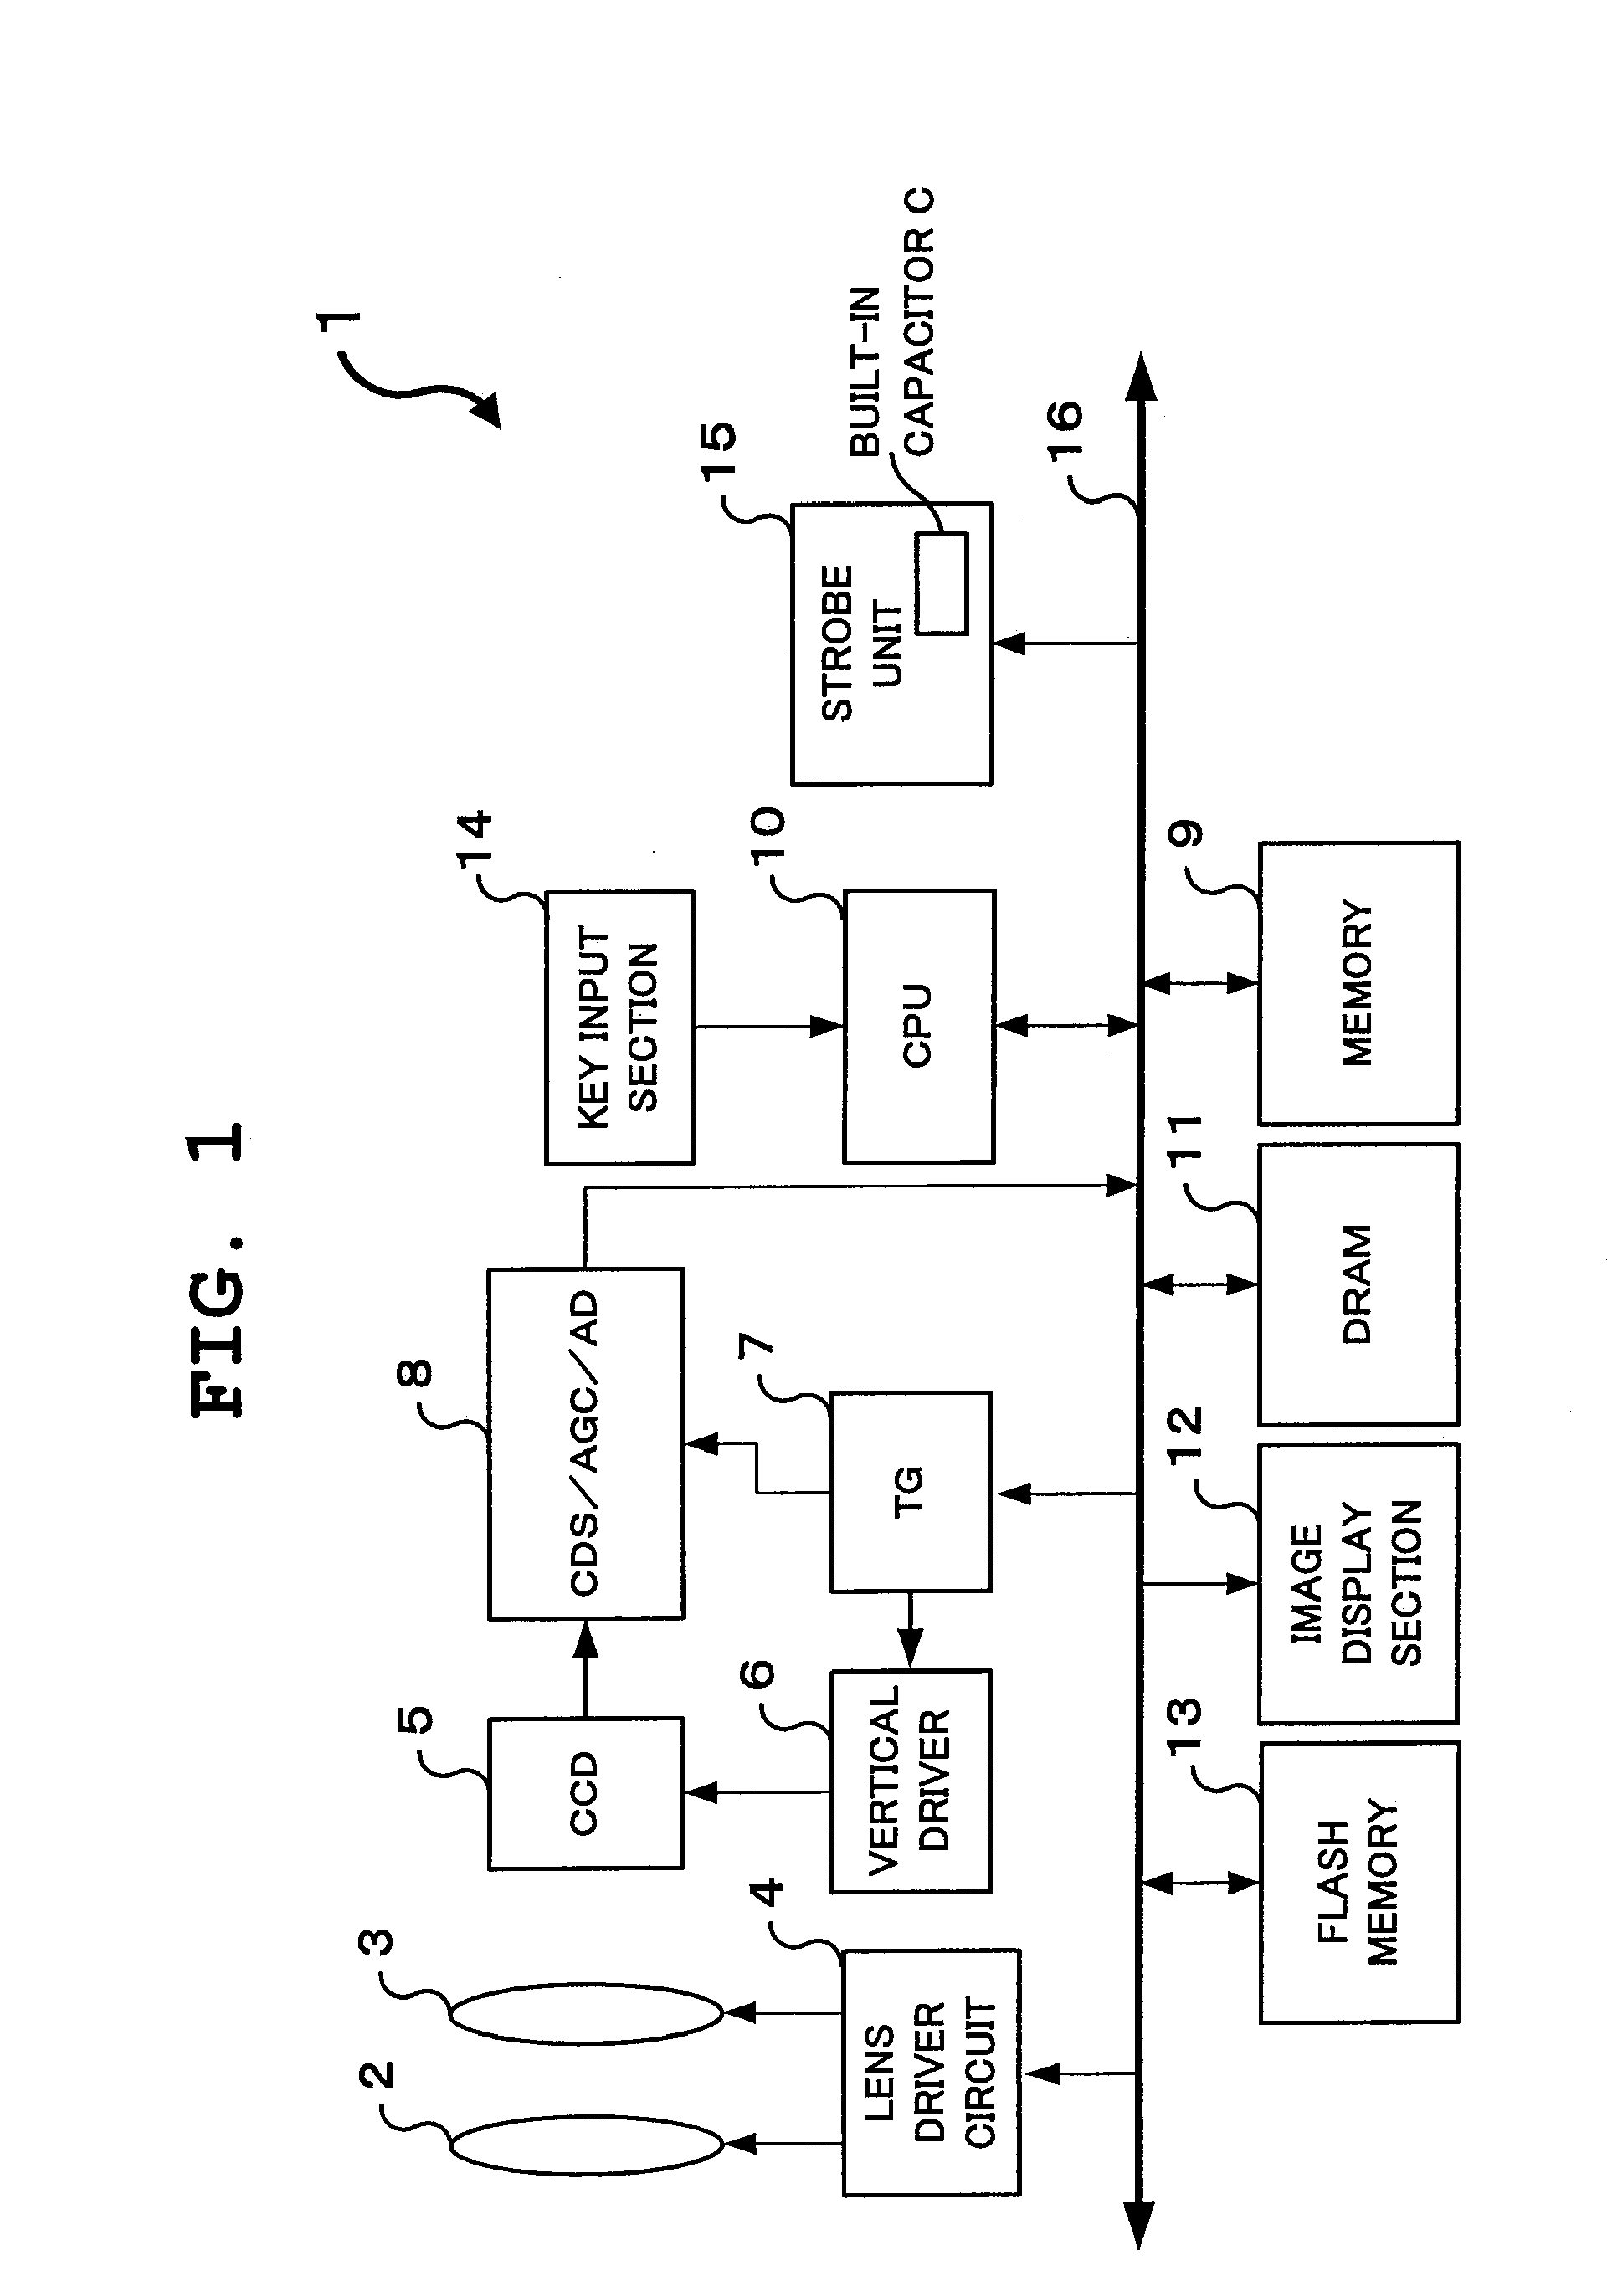 Imaging apparatus with strobe consecutive shooting mode